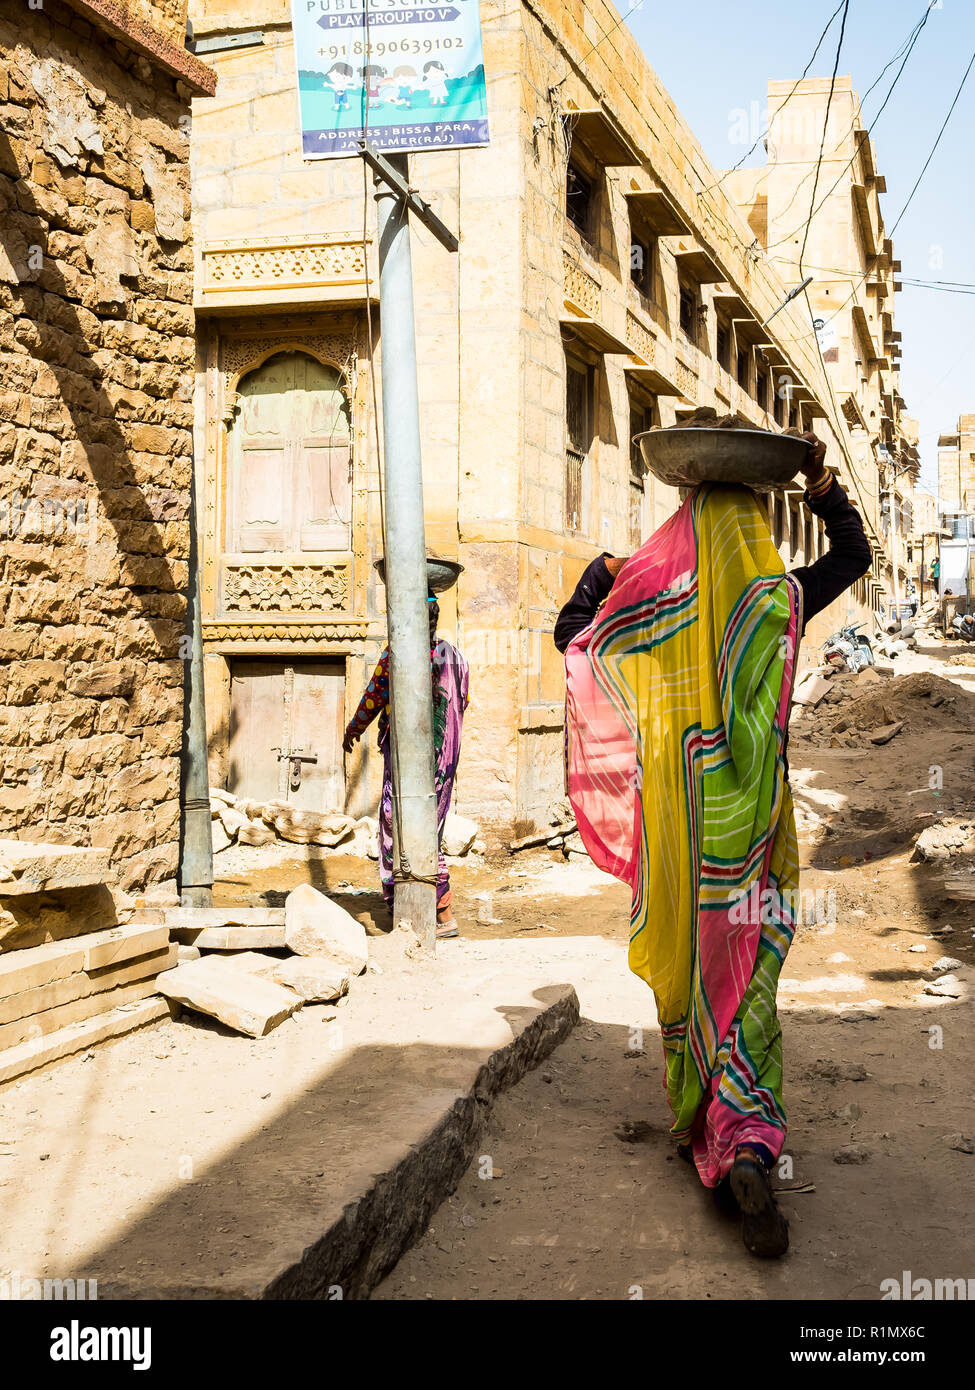 Women employed in construction works, carrying heavy bowls of rubble and soil on their heads. India Jaisalmer June 2018 Stock Photo